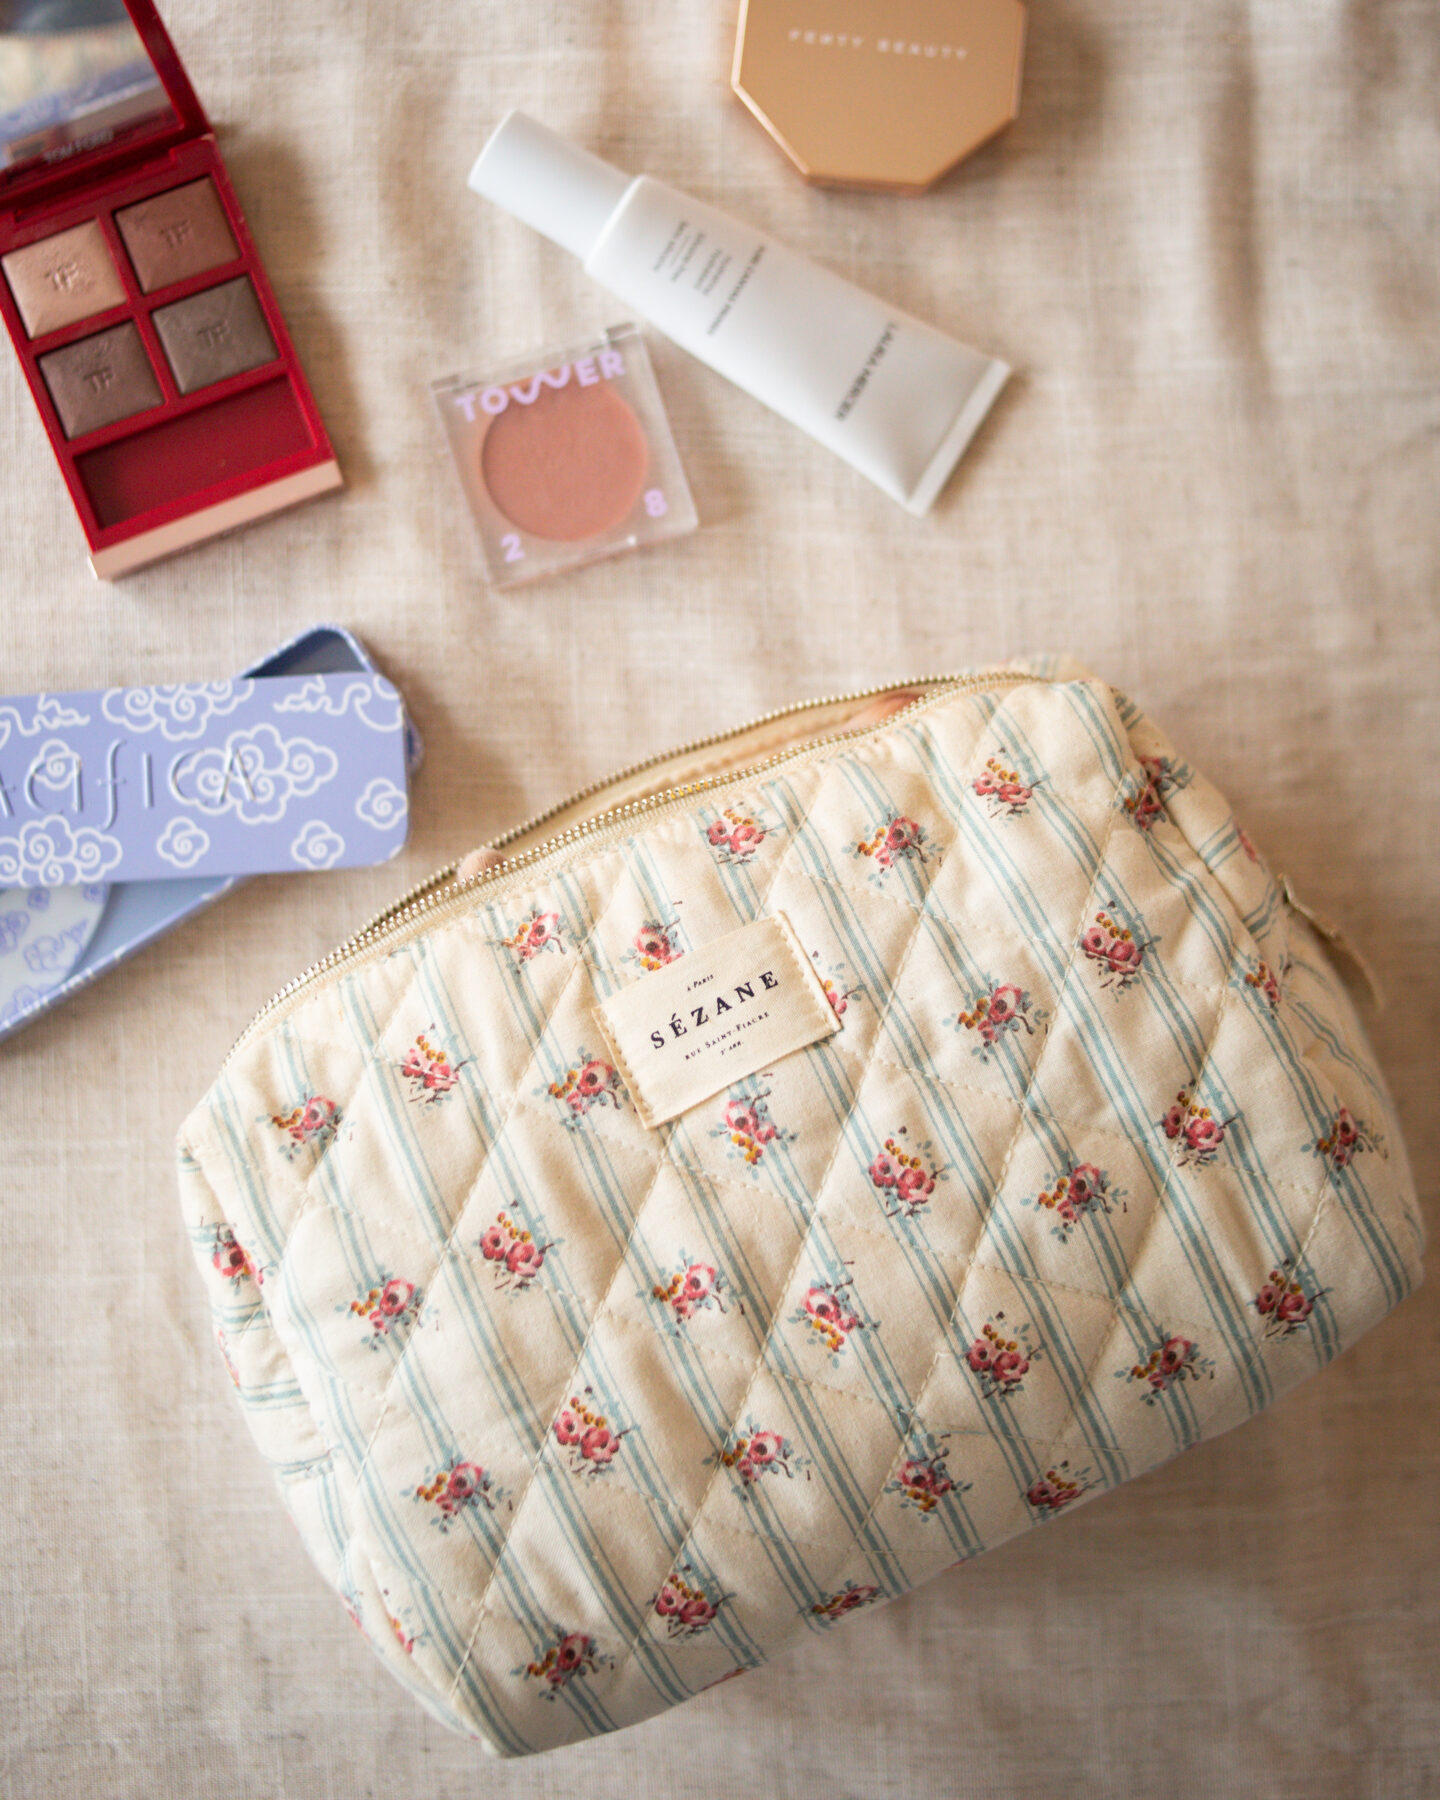 Karin Emily shares a quilted floral toiletry bag from Sezane for her Mother's Day Gift Guide